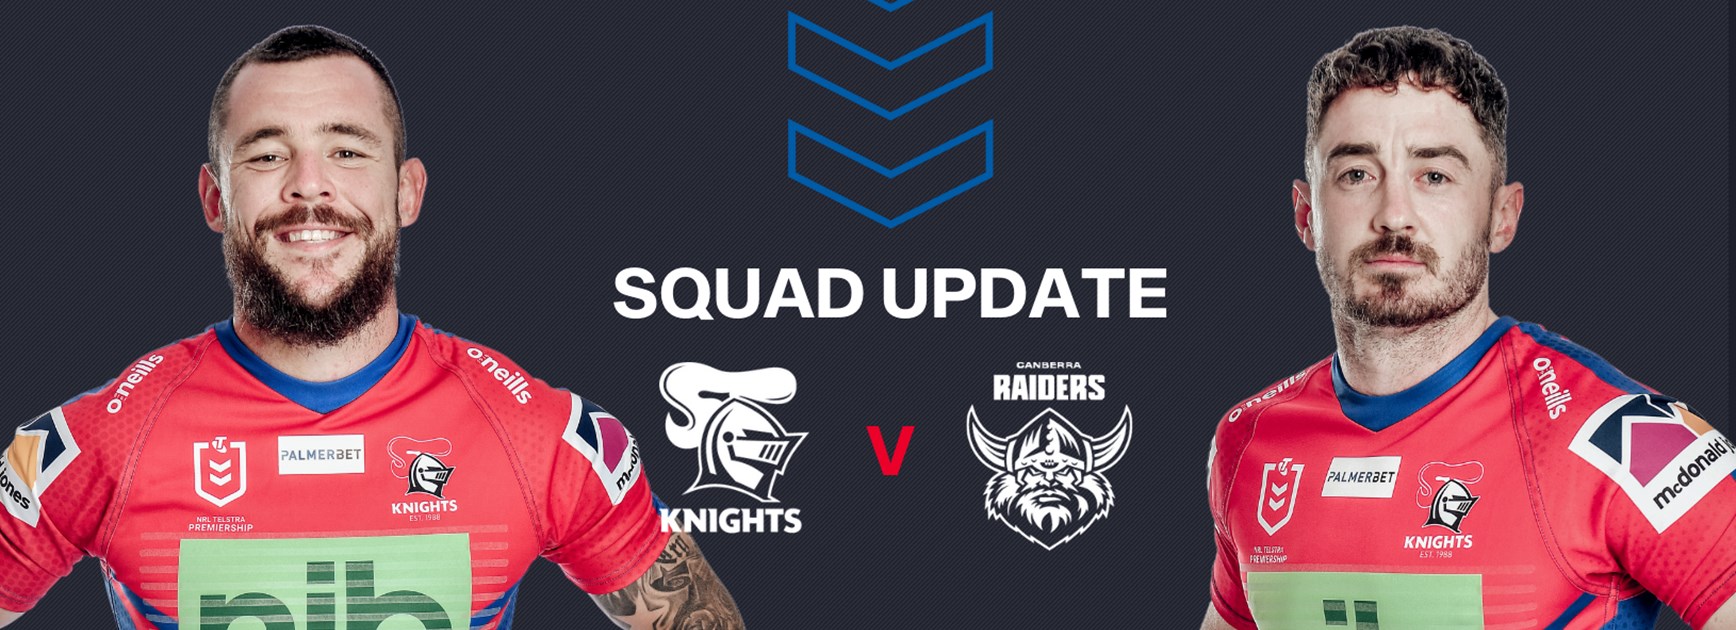 Squad Update: Change in the halves